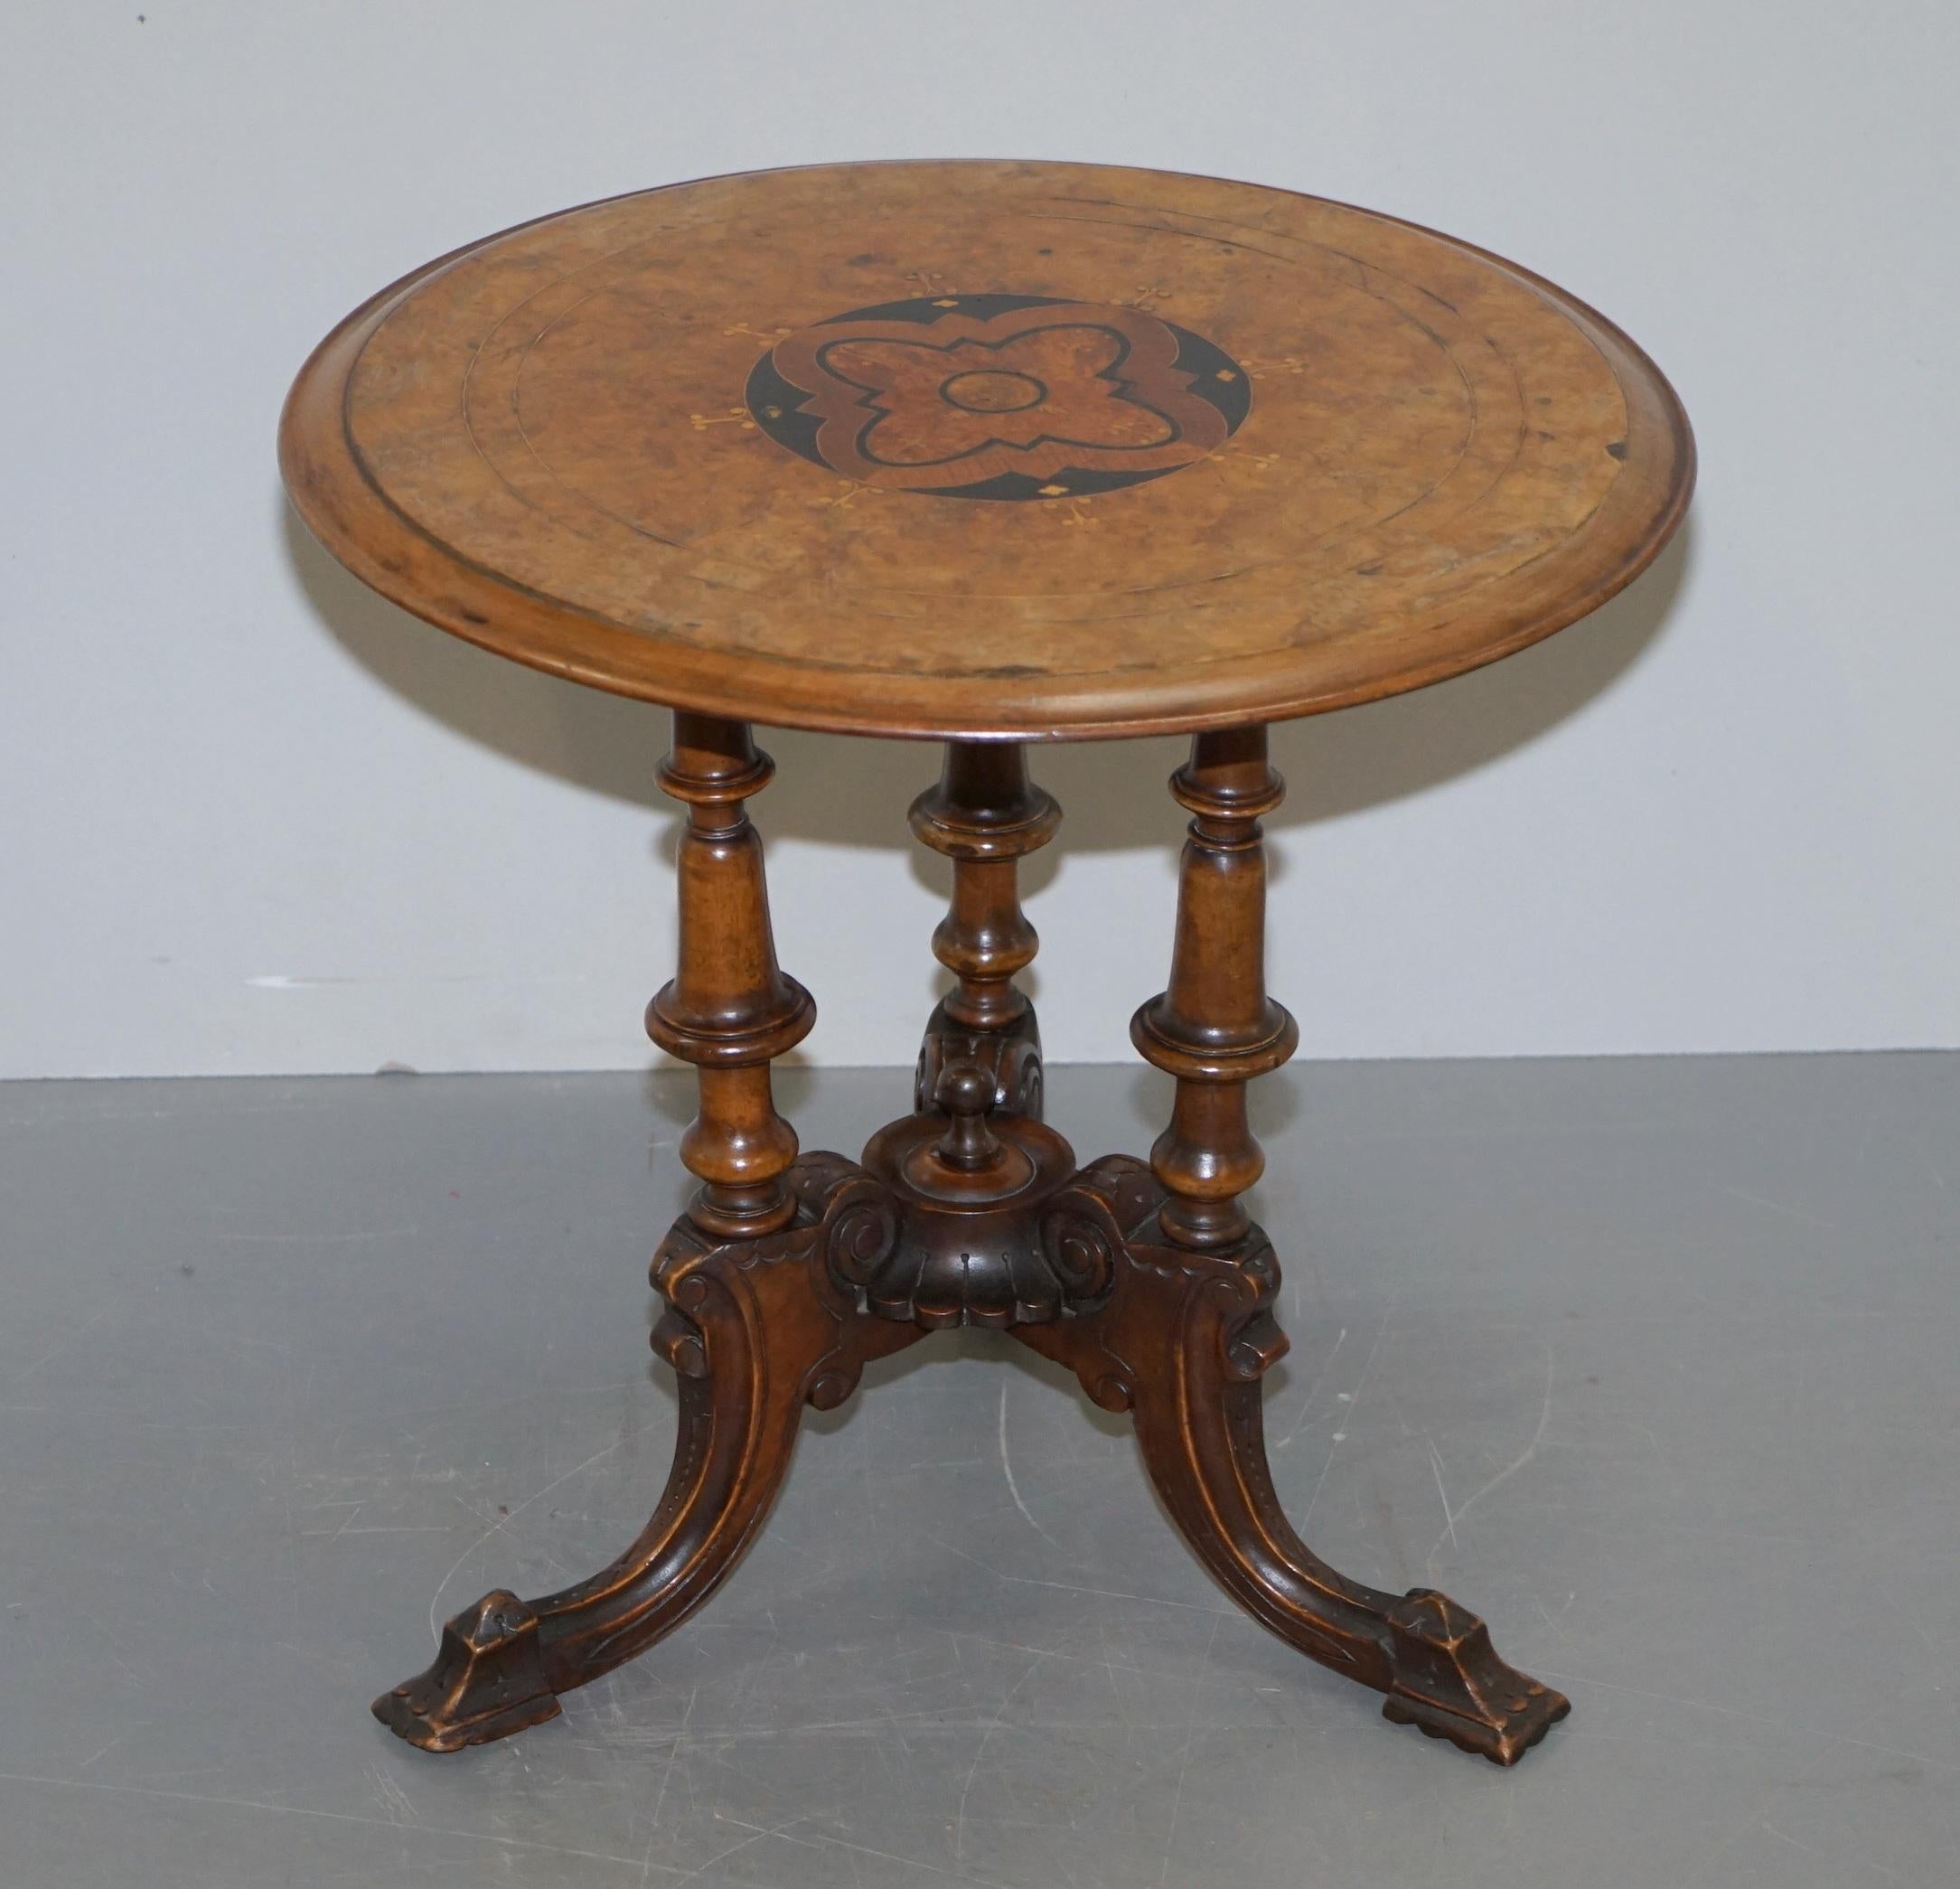 We are delighted to offer for sale this sublime Victorian circa 1860 burr and burl walnut tripod table in original condition with triple pillared base

A glorious little side table, heavily carved to the base with three pillars, the timber patina